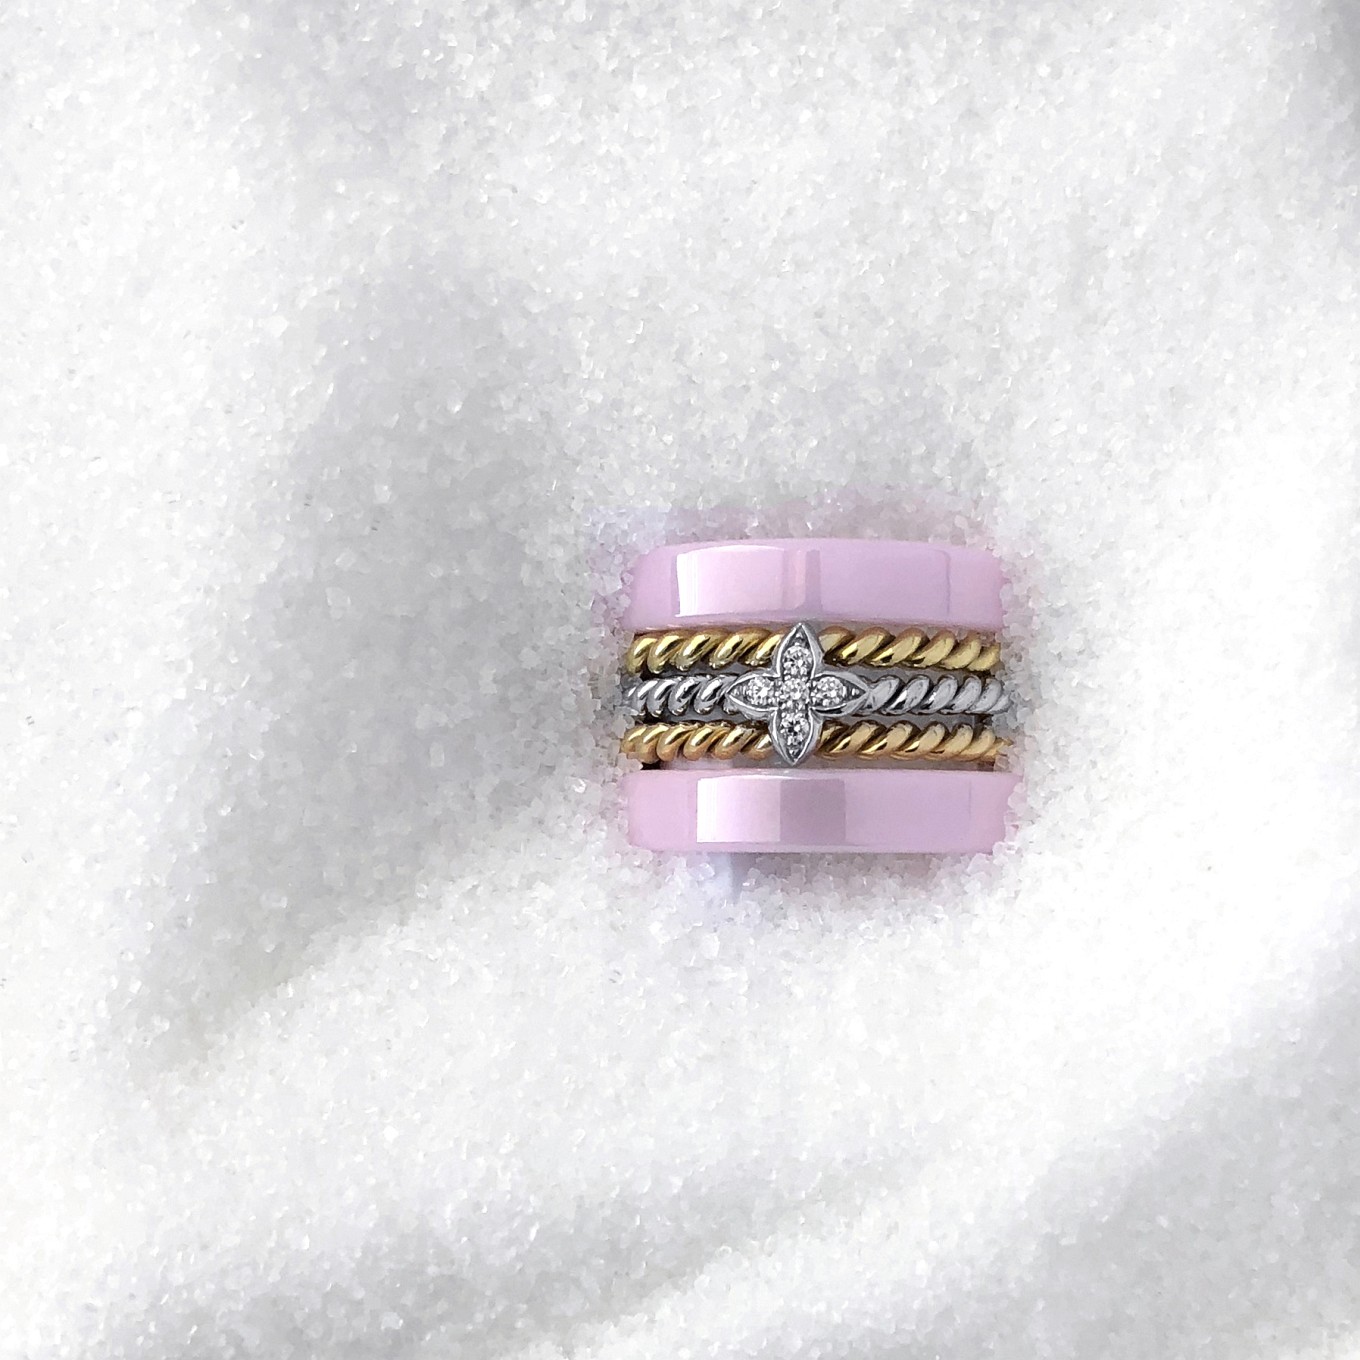 PINK CERAMIC BANDSPAIRED WITH BRAIDED BANDS & DIAMOND SEVILLA BAND